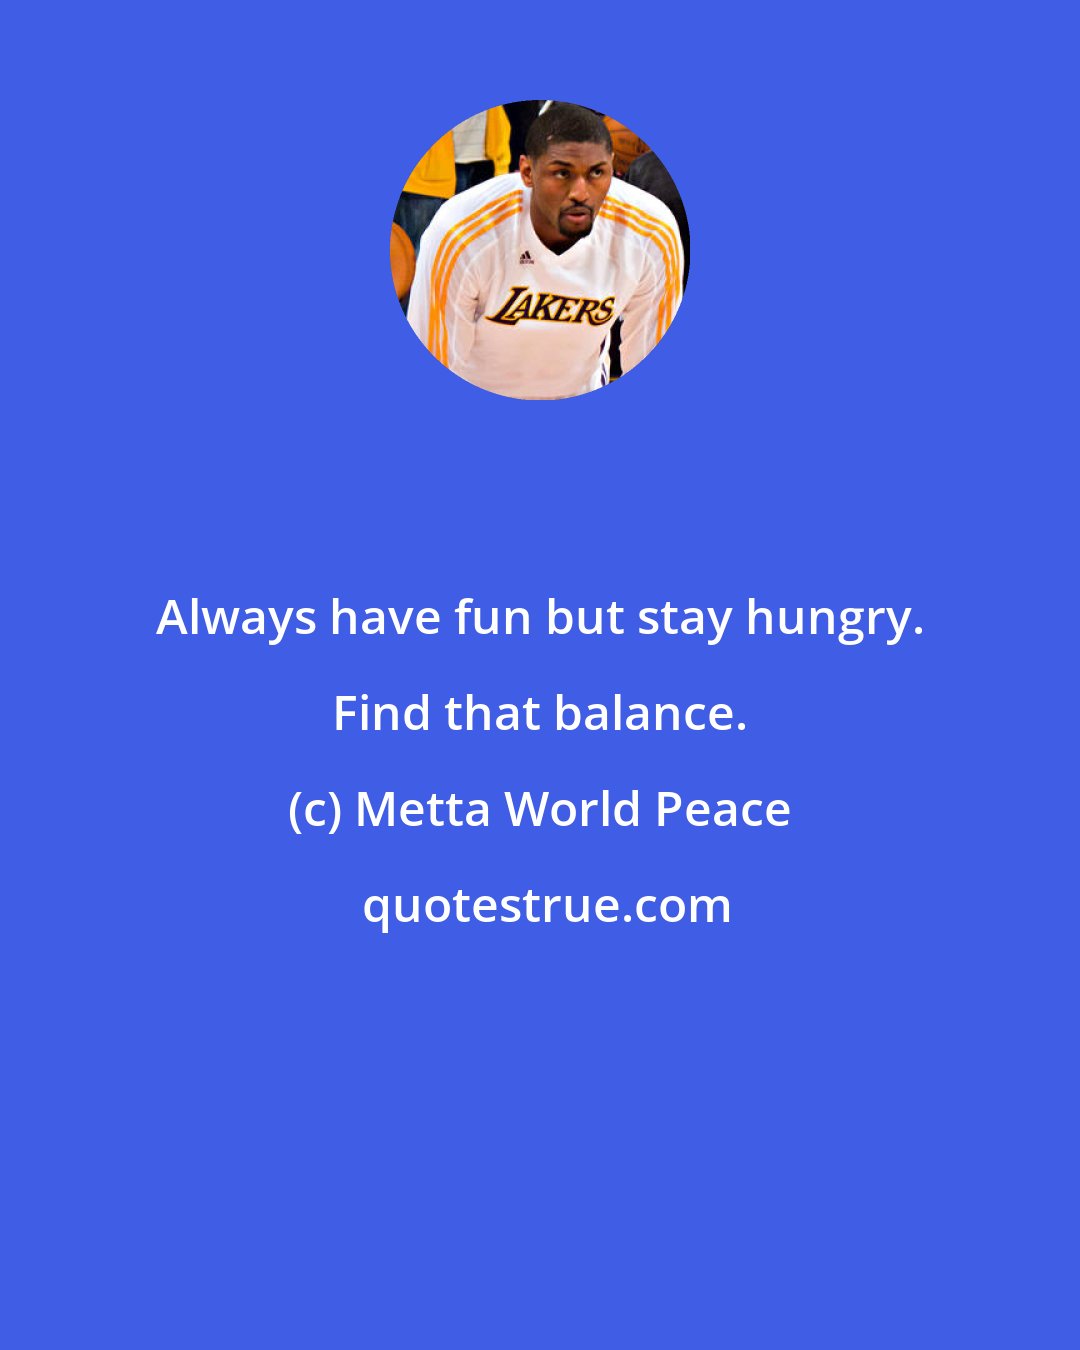 Metta World Peace: Always have fun but stay hungry. Find that balance.